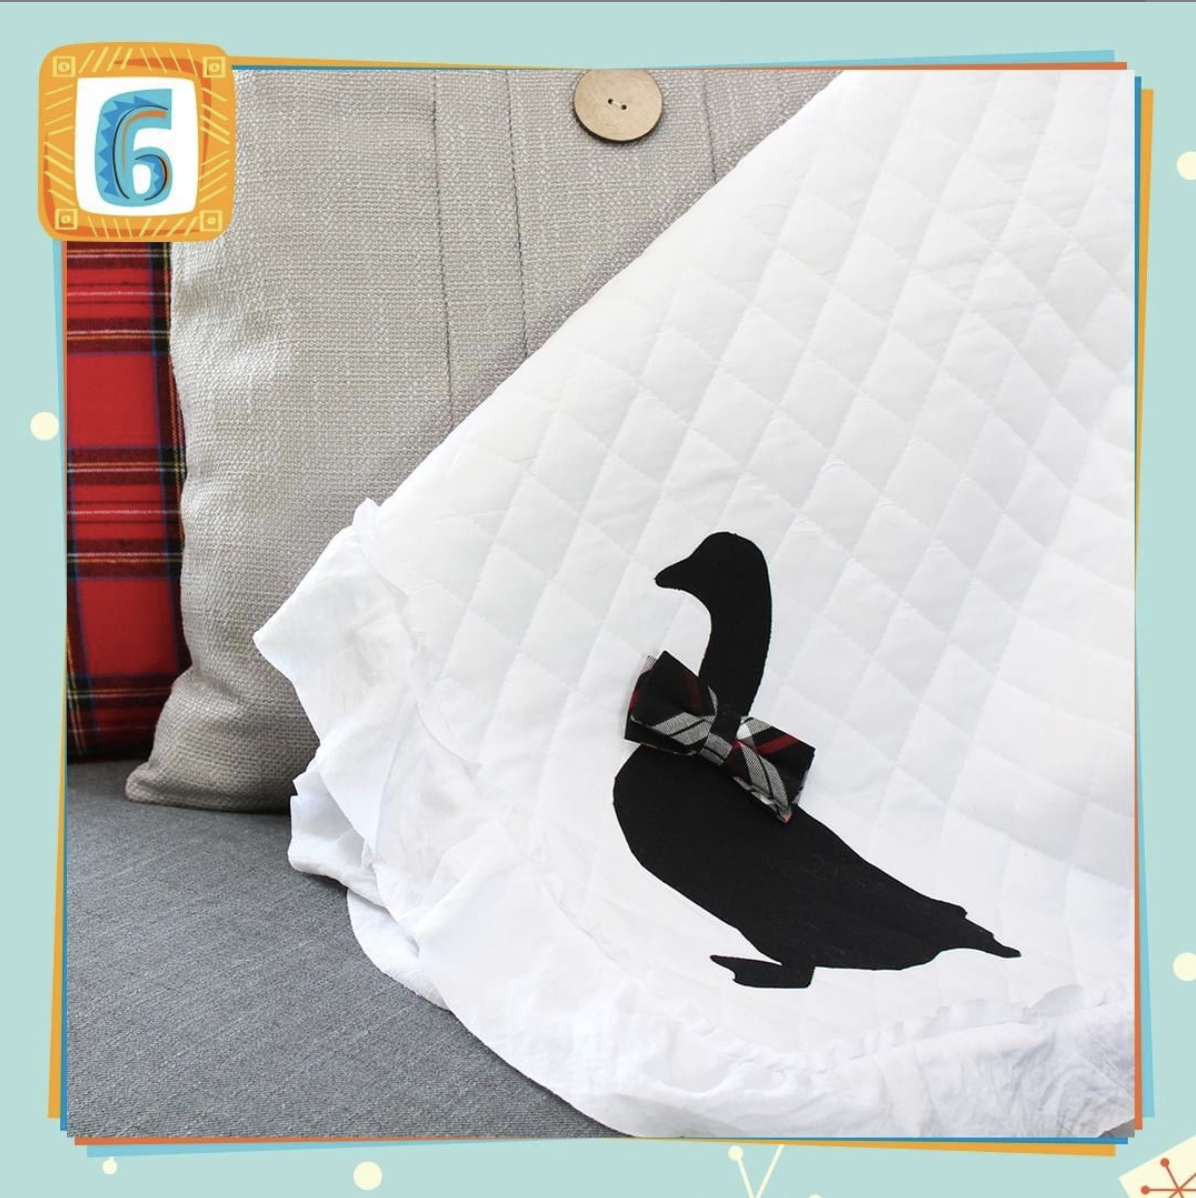 🎵On the 6th day of Christmas 🎵… @creativegreenliving dreamed up #DIY geese-a-laying for the CPI. Geese cost $390 this year, but why buy when you can DIY? Check out this Goose Applique Throw Blanket!